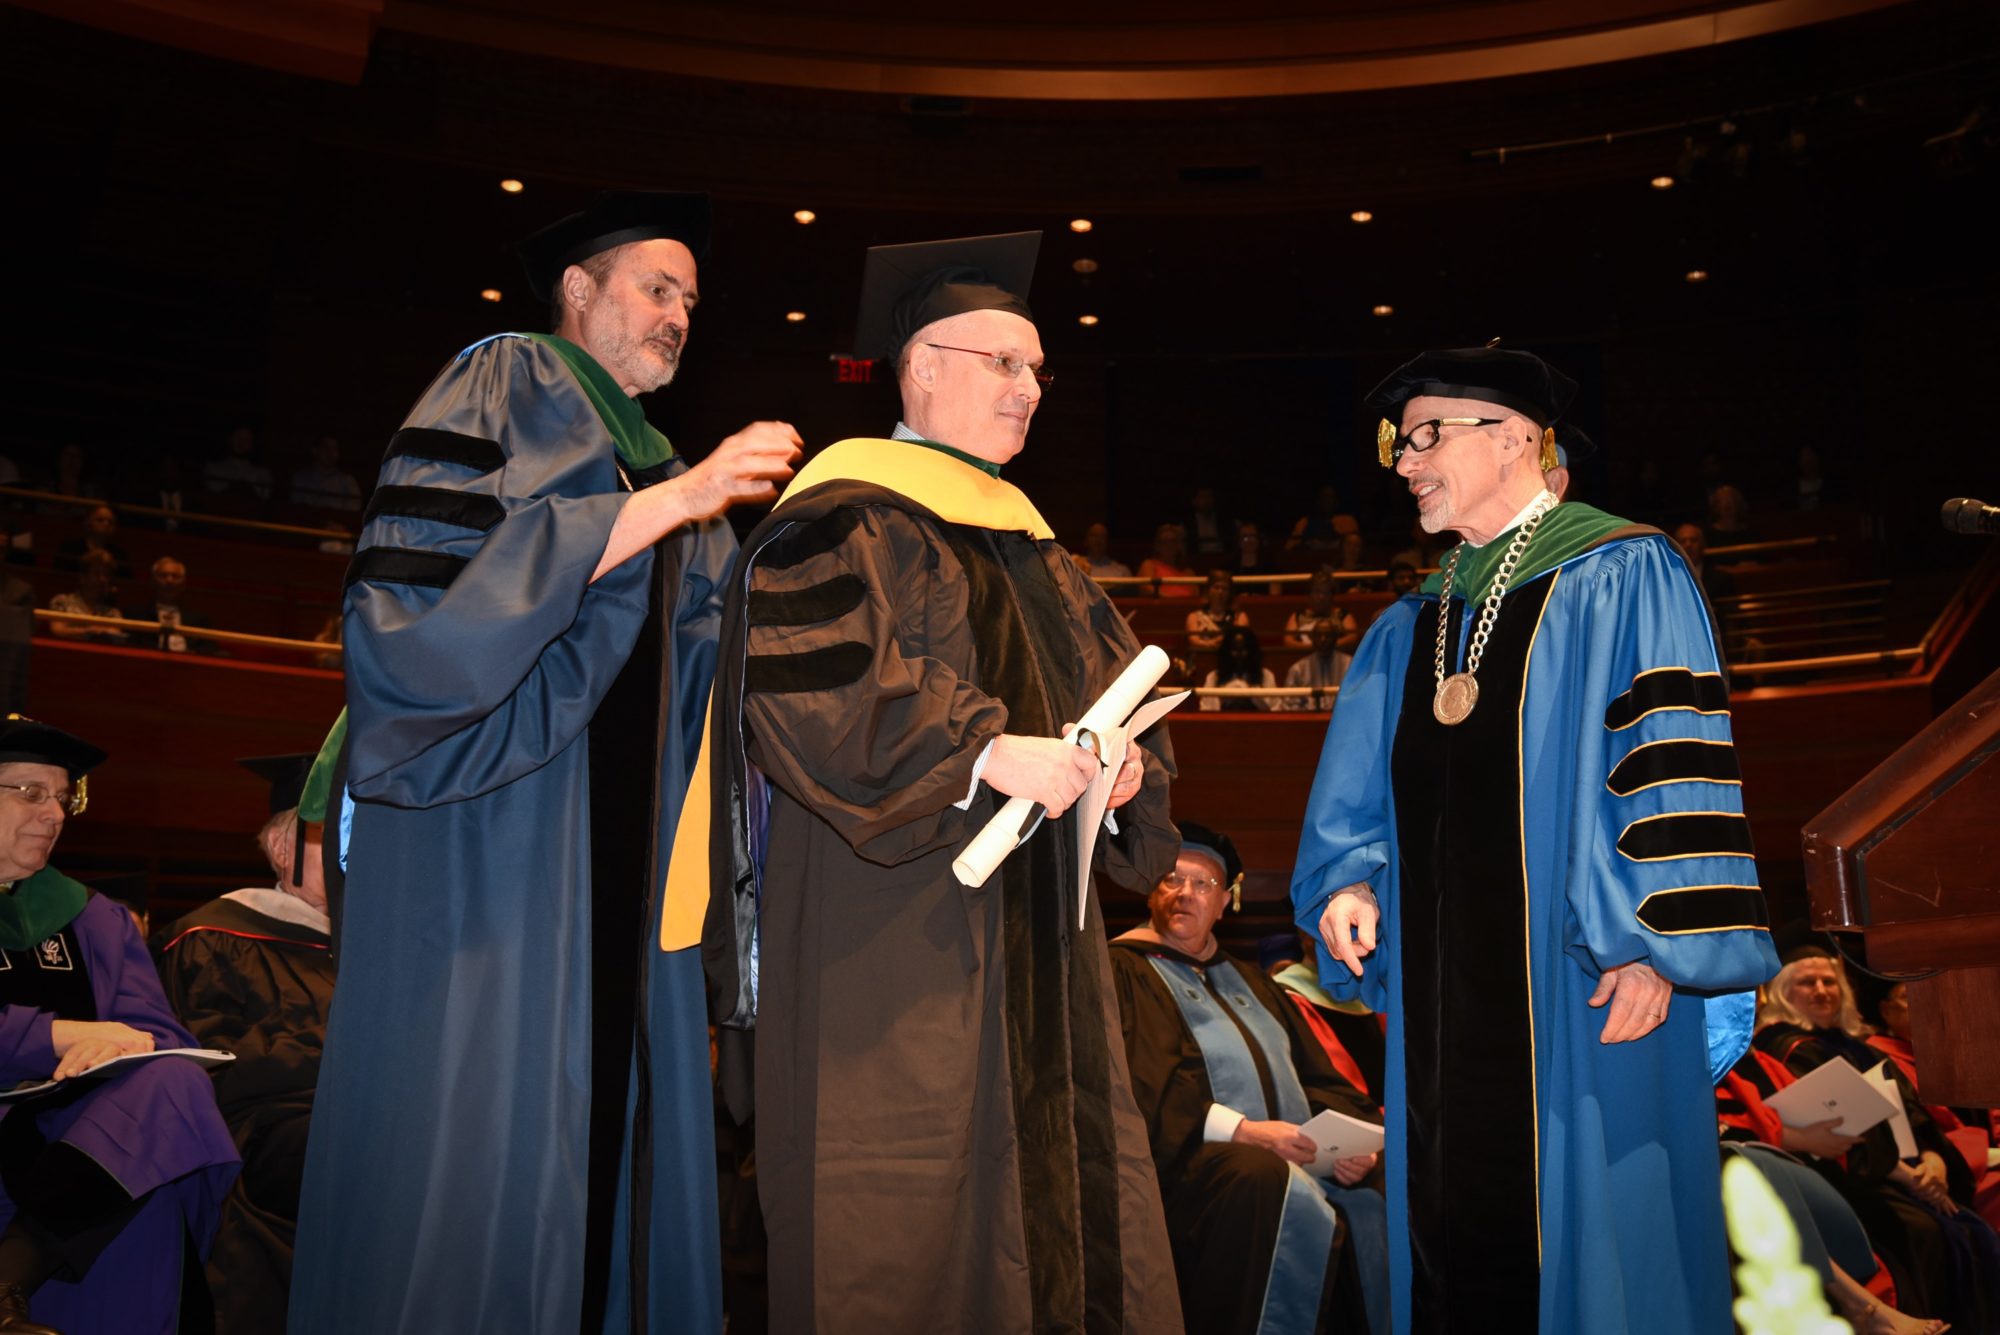 Dr. Ricciardi received an honorary degree from Jefferson in the spring.